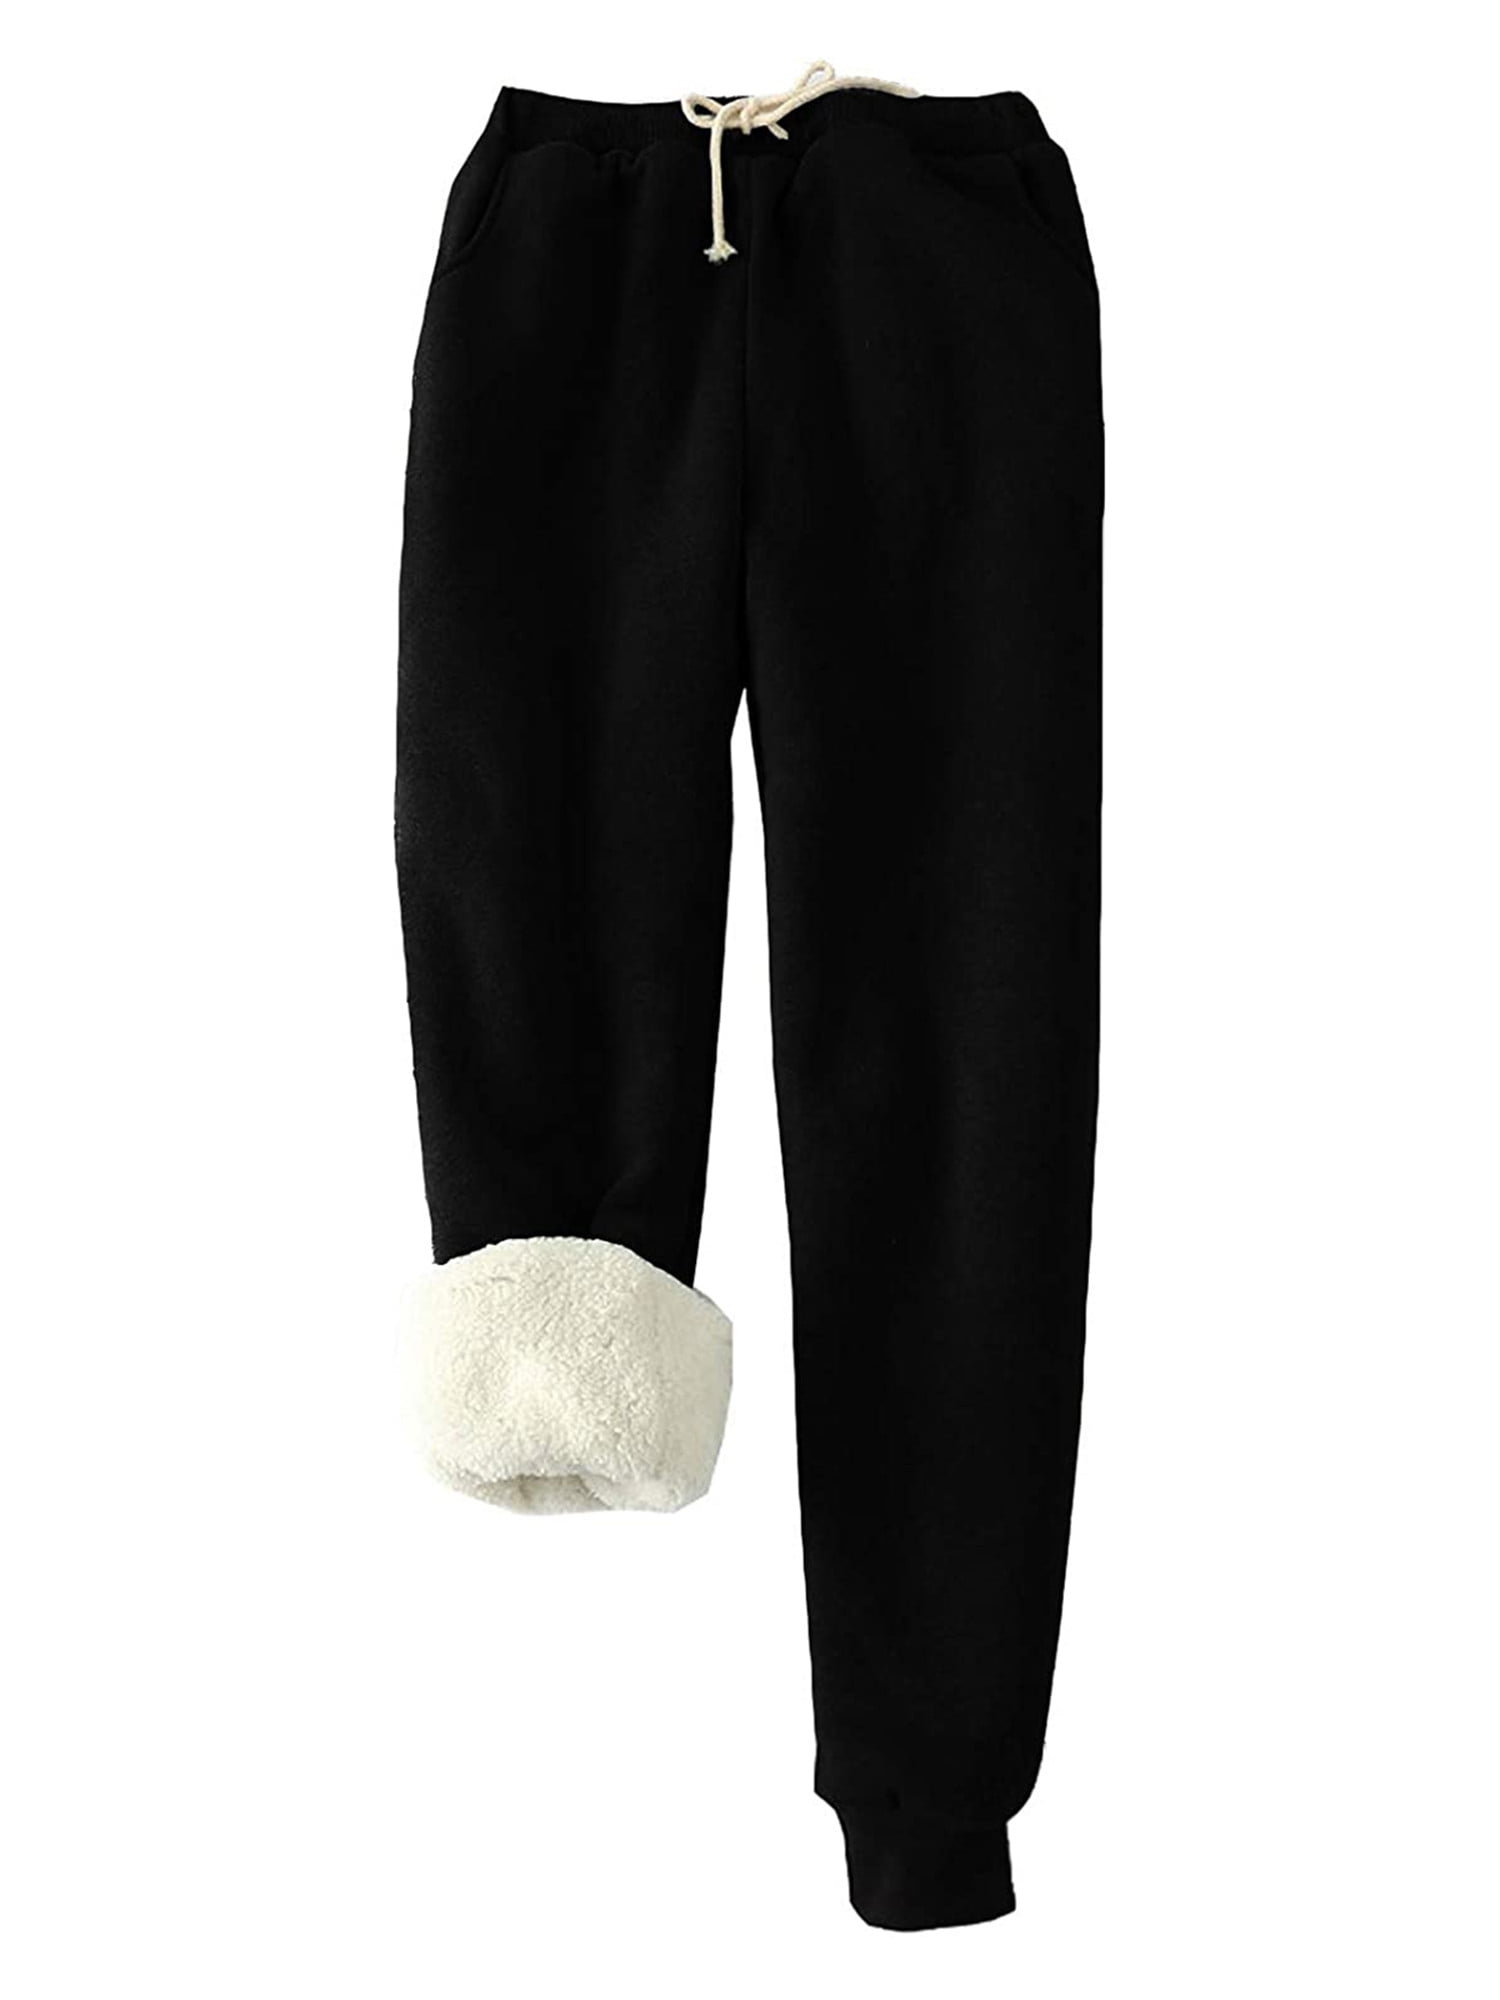 Mens Winter Trousers Thick Fleece Lined Warm Casual Sprot Loose Jogger Pants